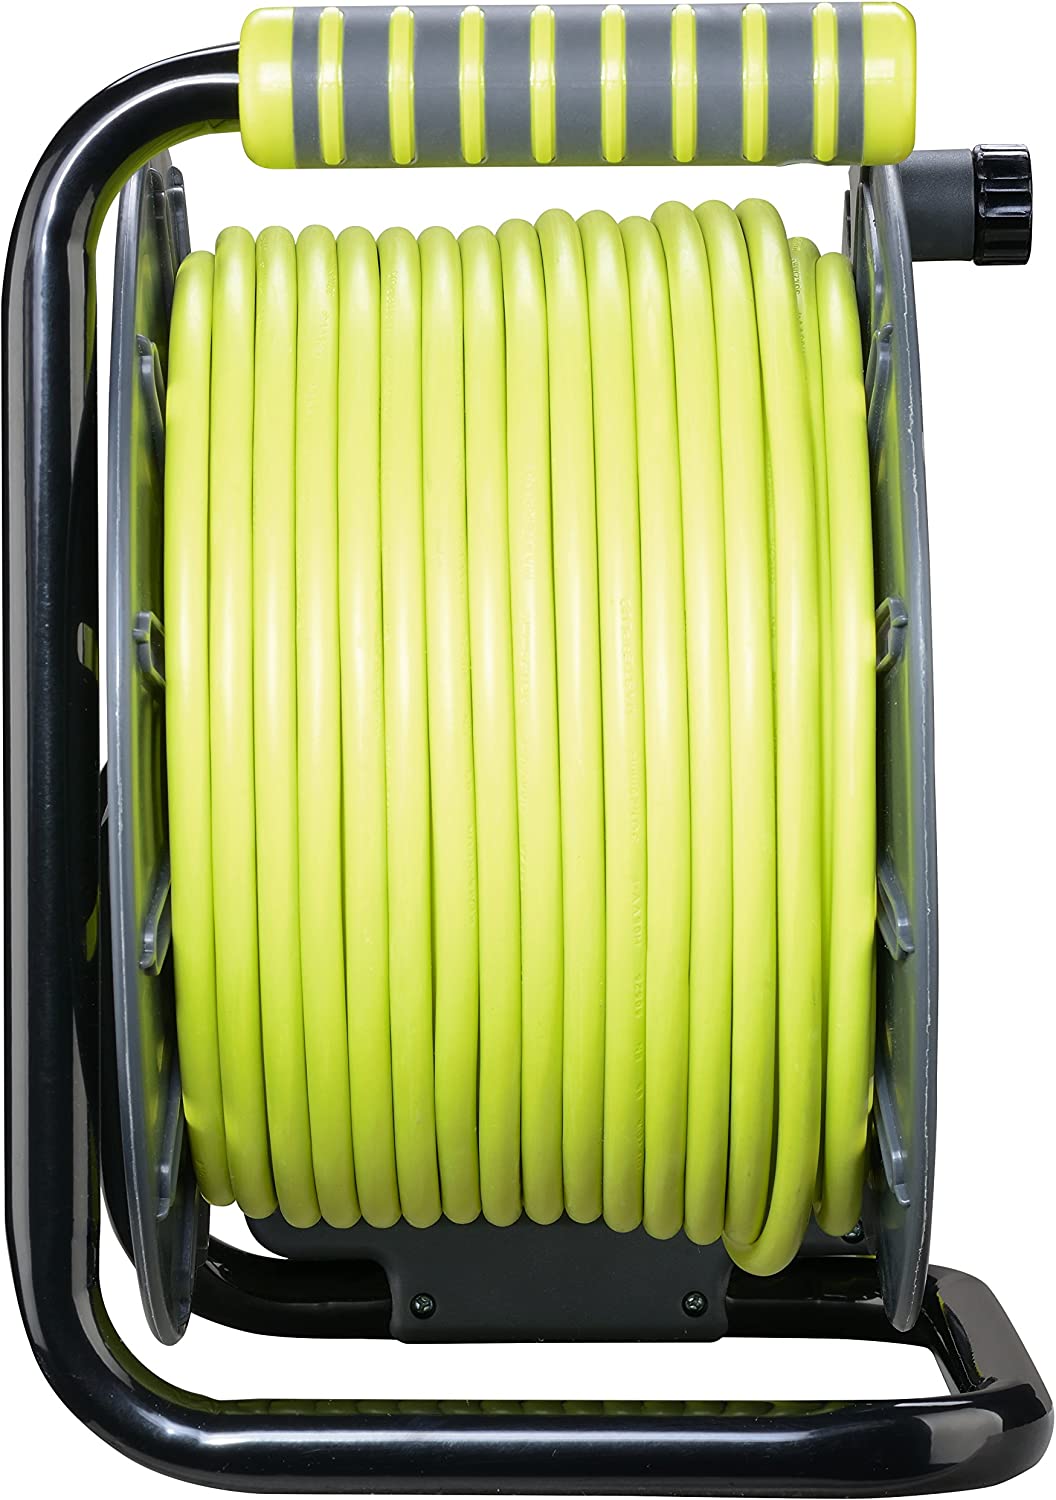 Masterplug 50m 4-Socket 13A Heavy Duty Extension Cable Reel